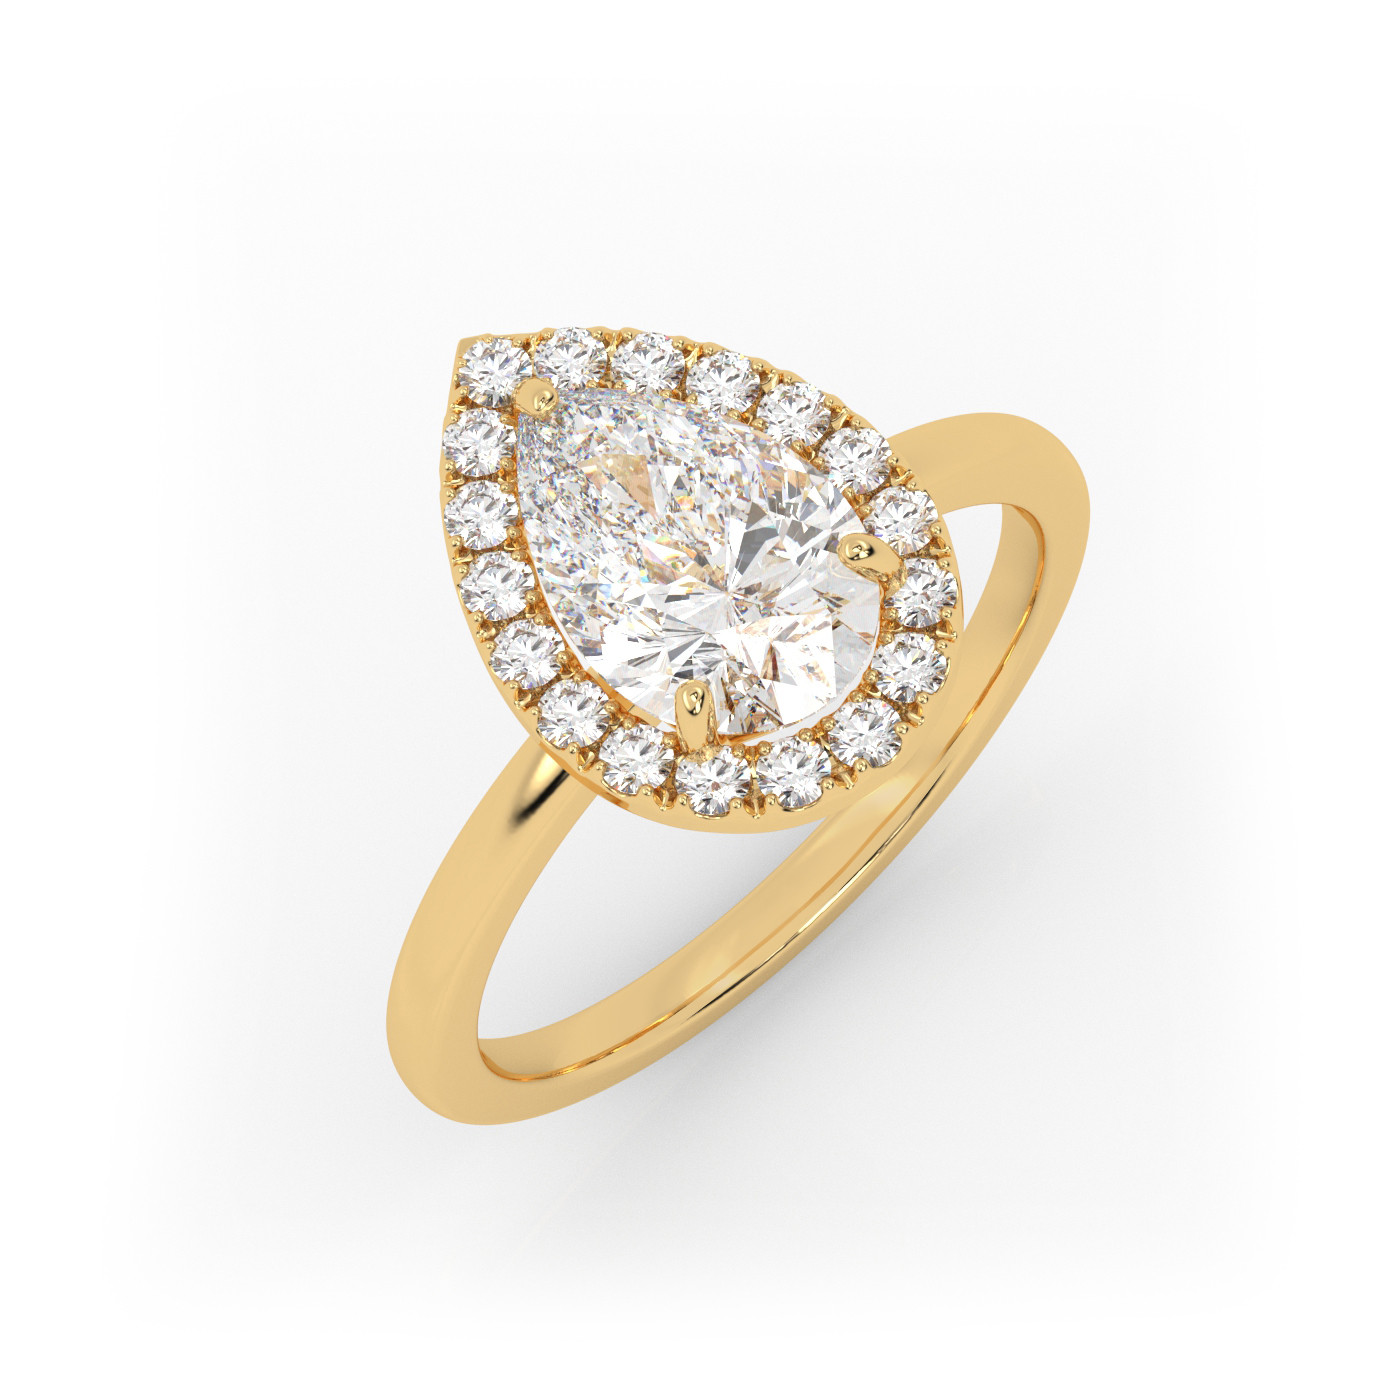 18K YELLOW GOLD Pear Diamond Cut Engagement Ring with Halo Style